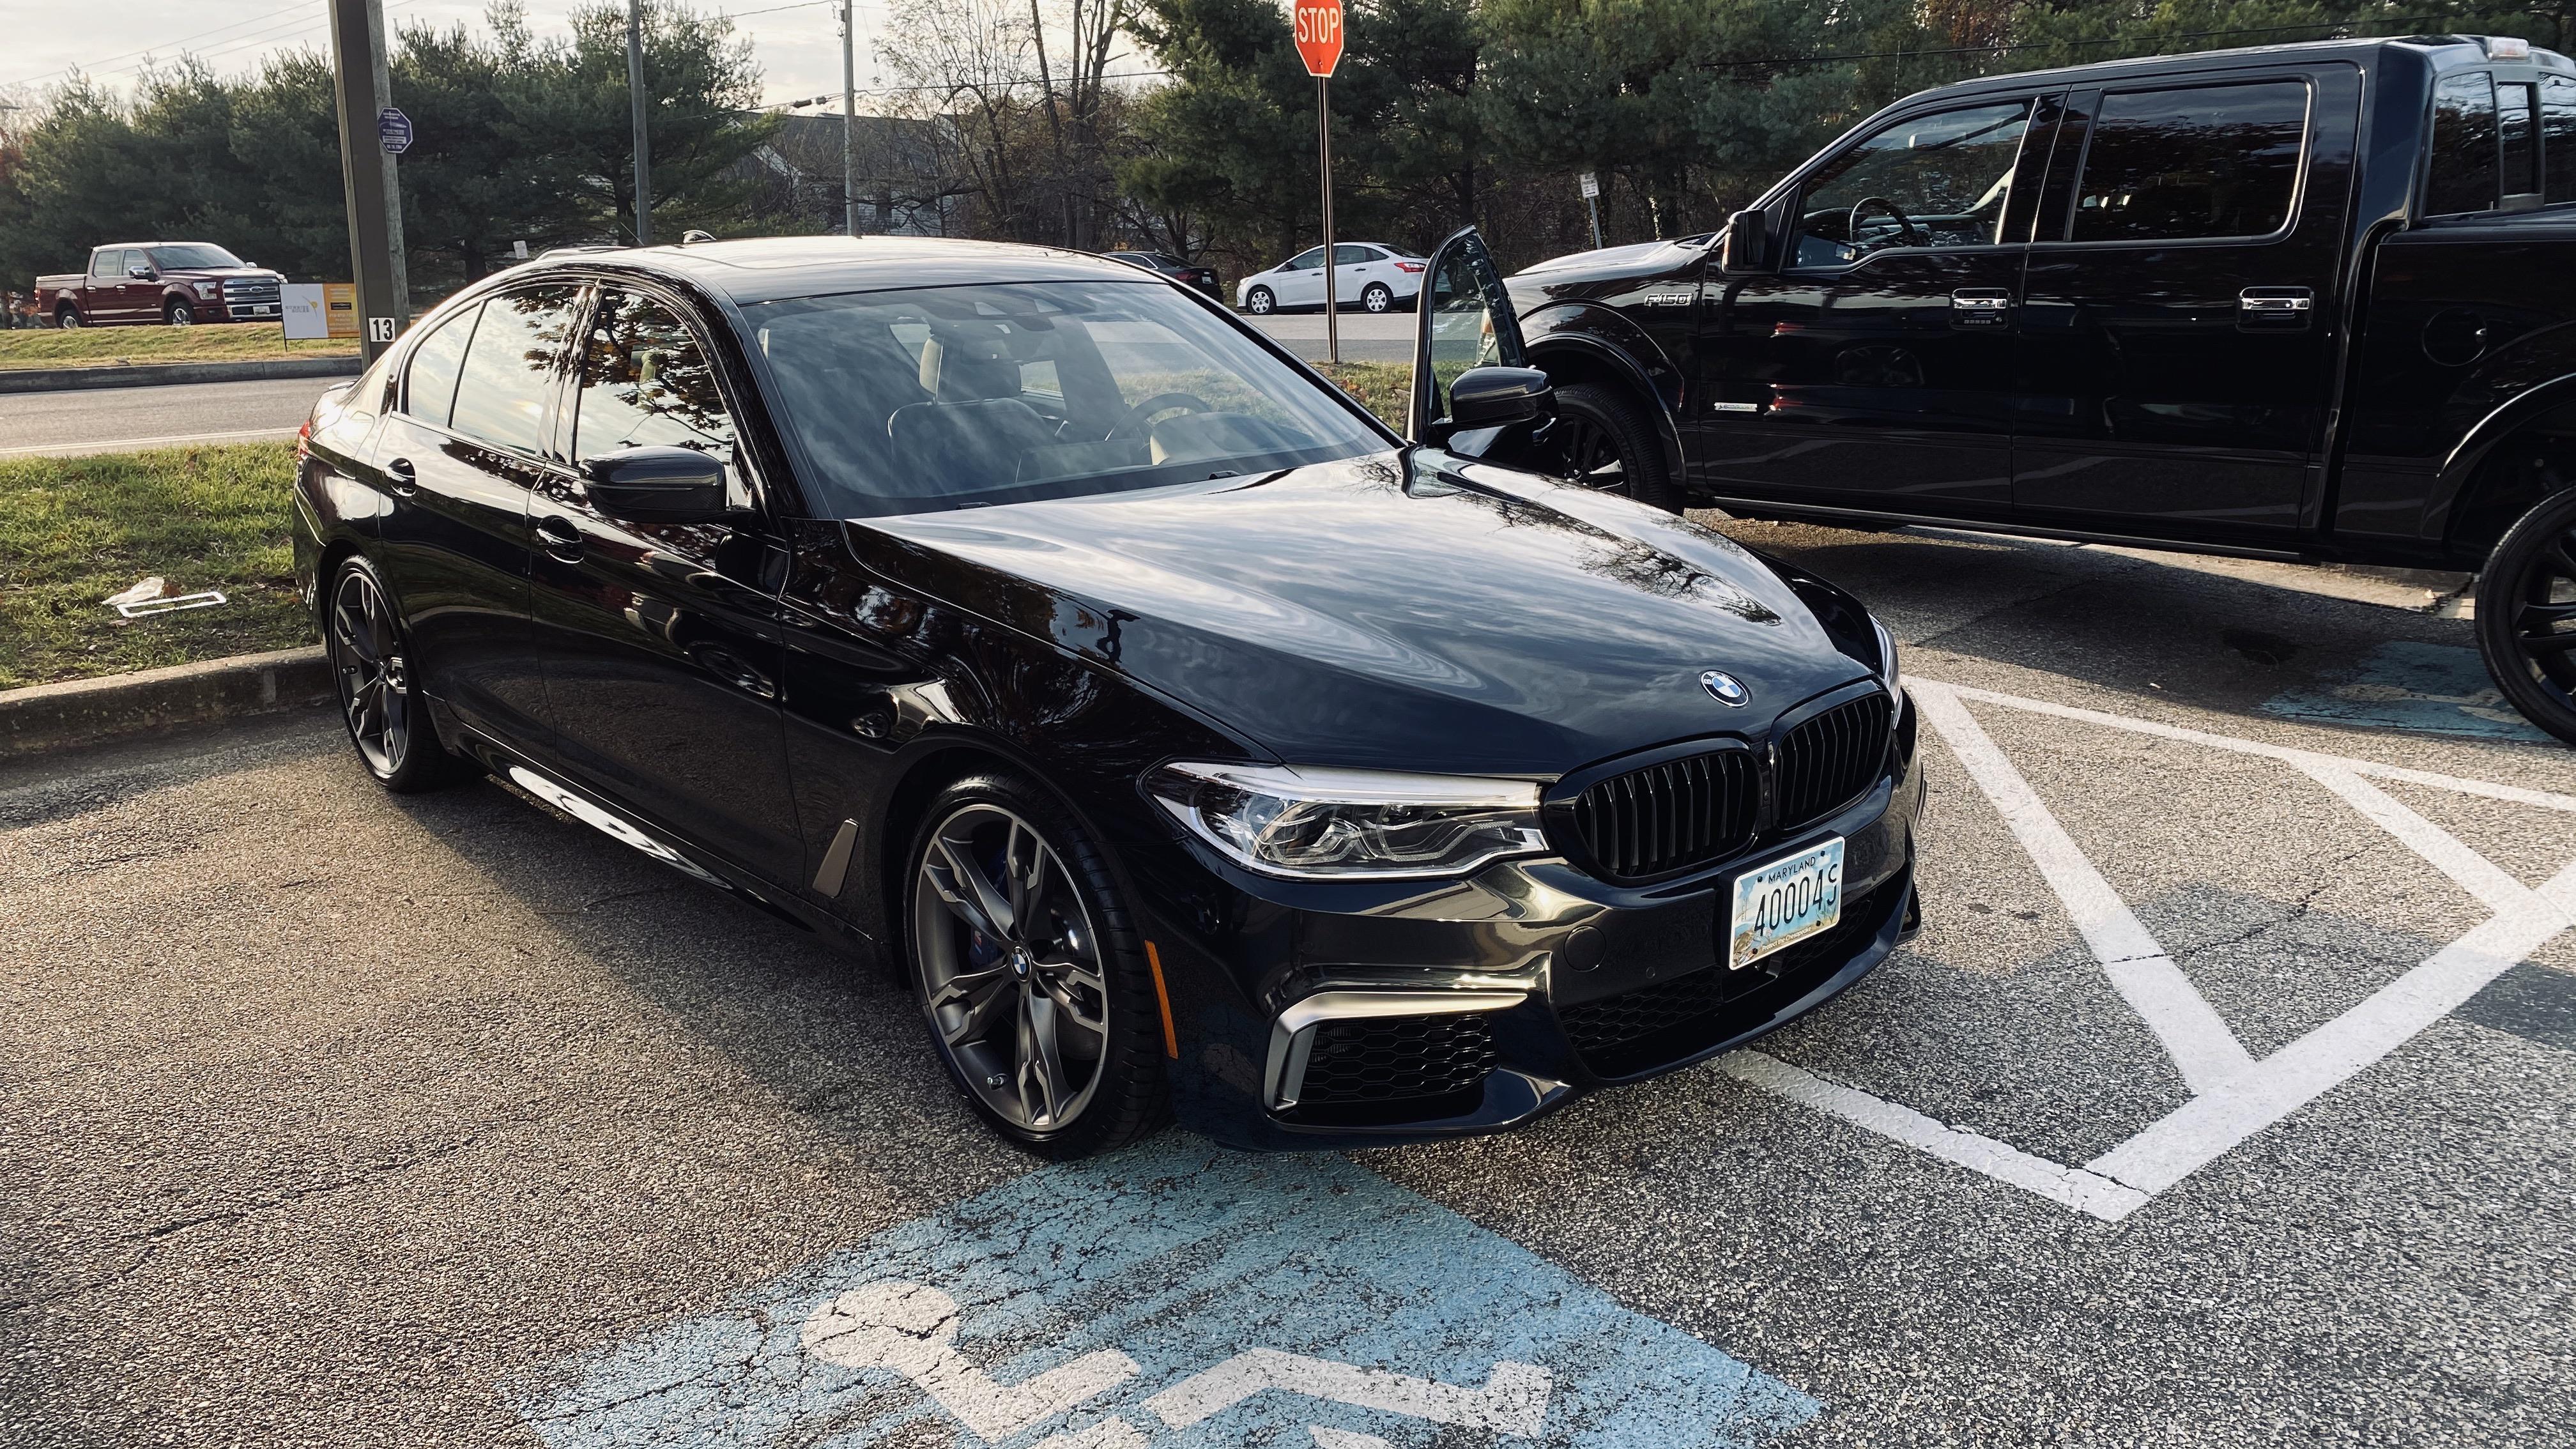 My new love that I picked up today! 2020 M550i, black on black. BTW, the  dealership parked her there, not me! : r/BMW